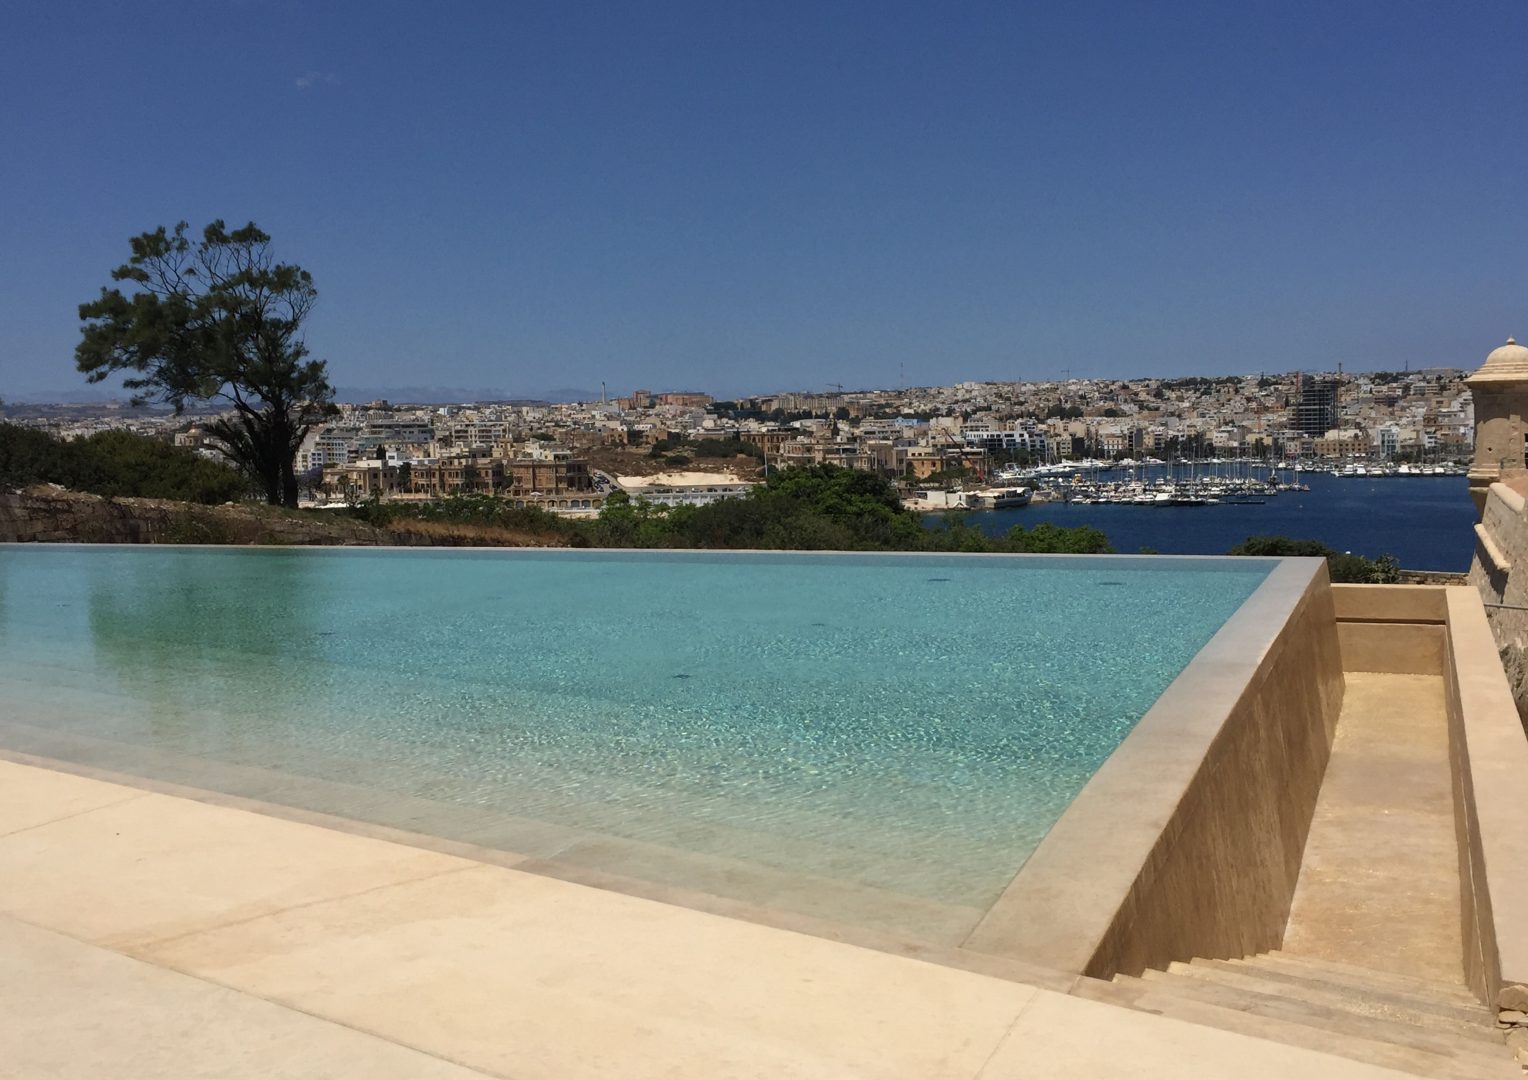 The view from the new pool area. Credits AP Valletta.